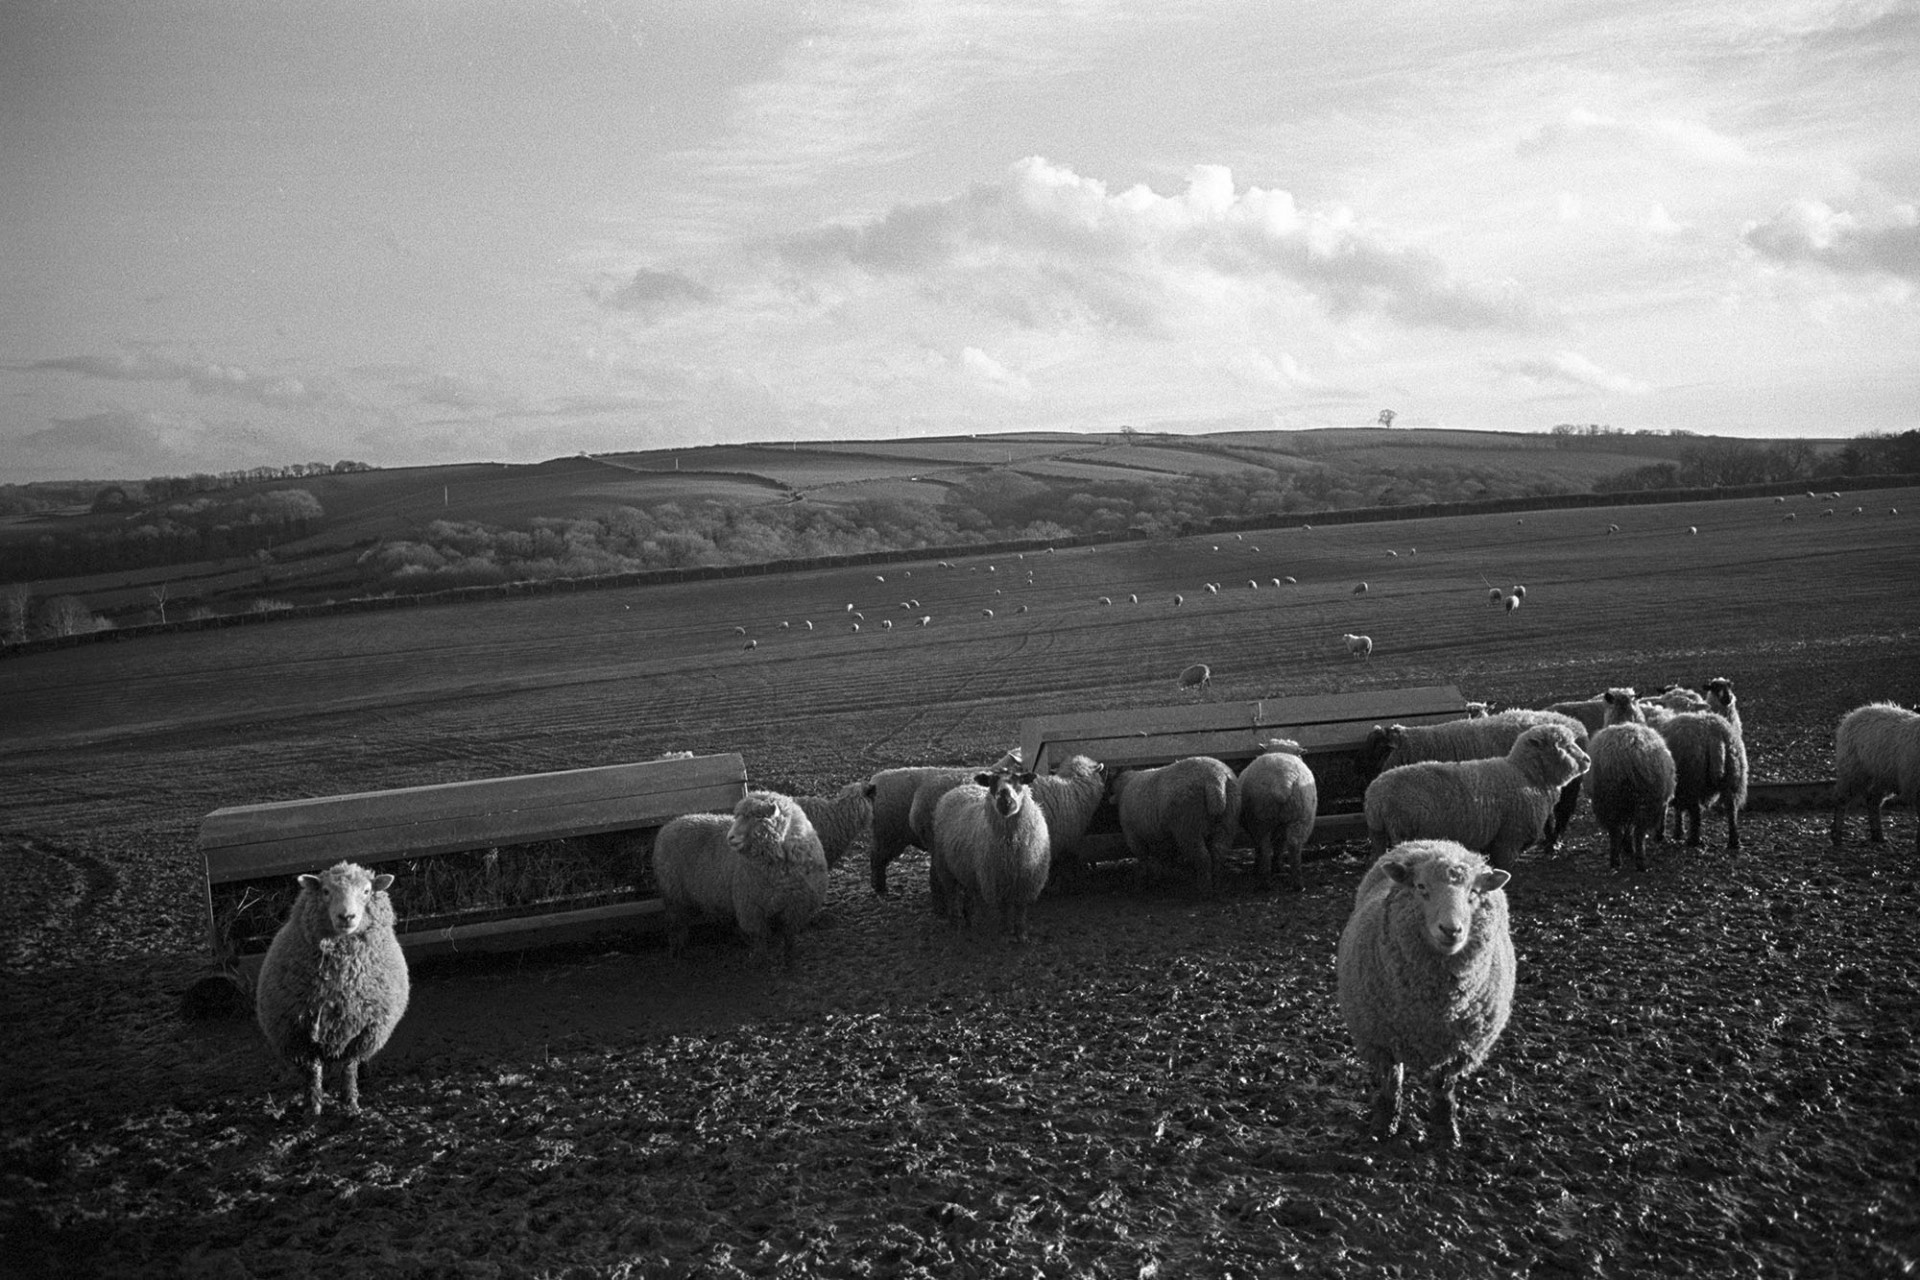 Sheep in muddy field, hoping to be fed. 
[A flock of sheep in a muddy field near Ashreigney. They are stood by two haystacks waiting to be fed.]